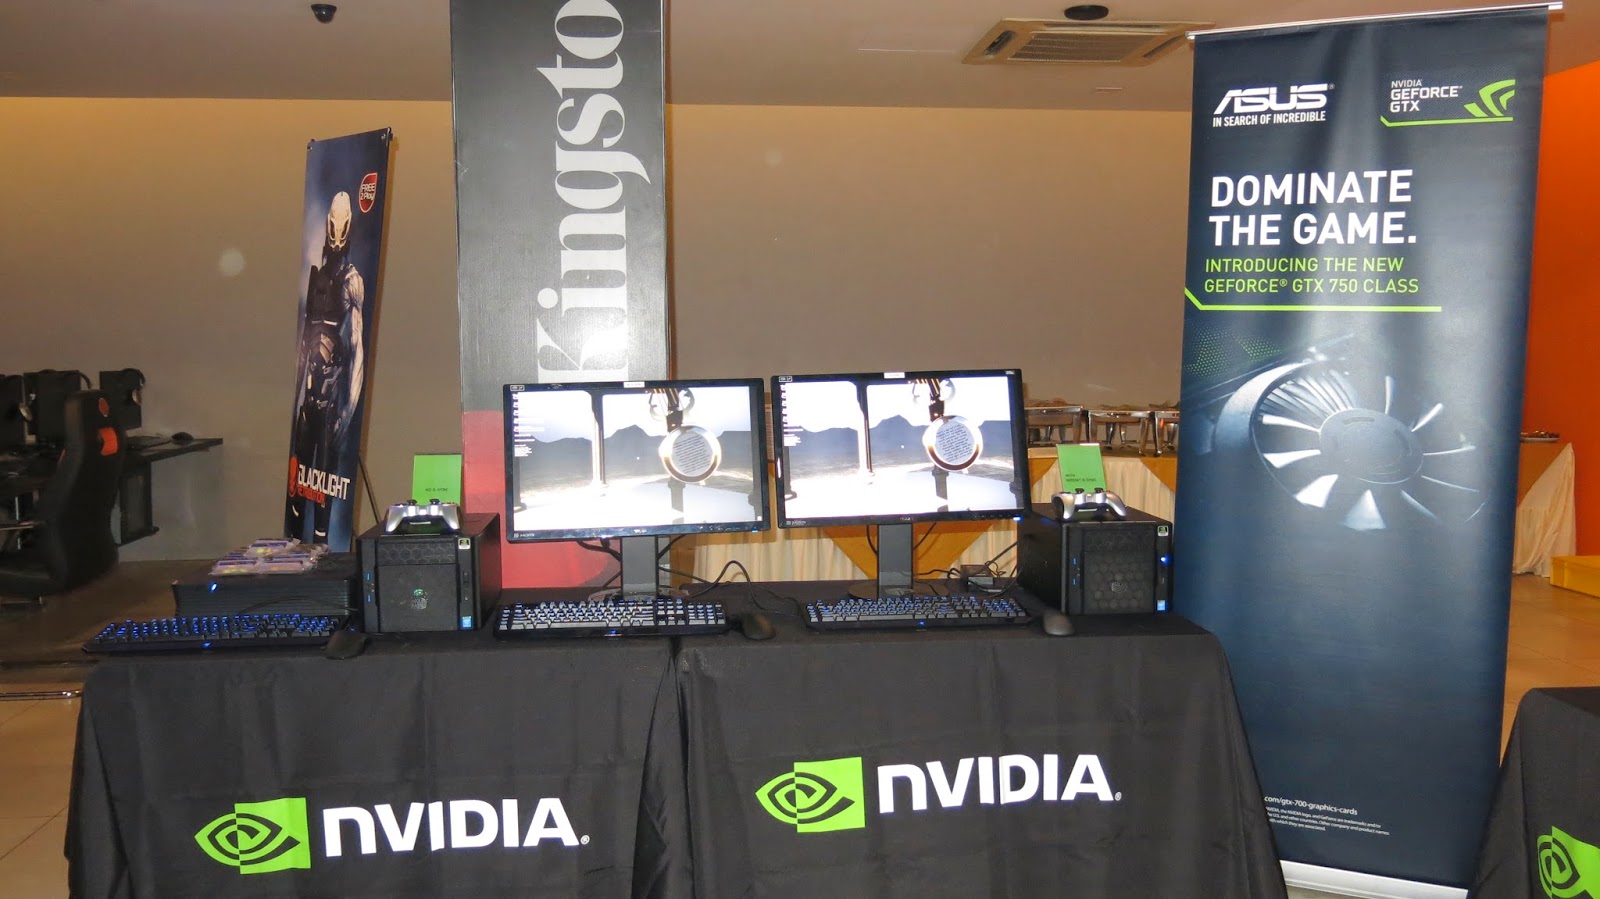 The Second ASUS & NVIDIA Gamers’ Gathering Demonstrates Cutting-Edge Technology Designed for Both Gamers and Tech Enthusiasts 32